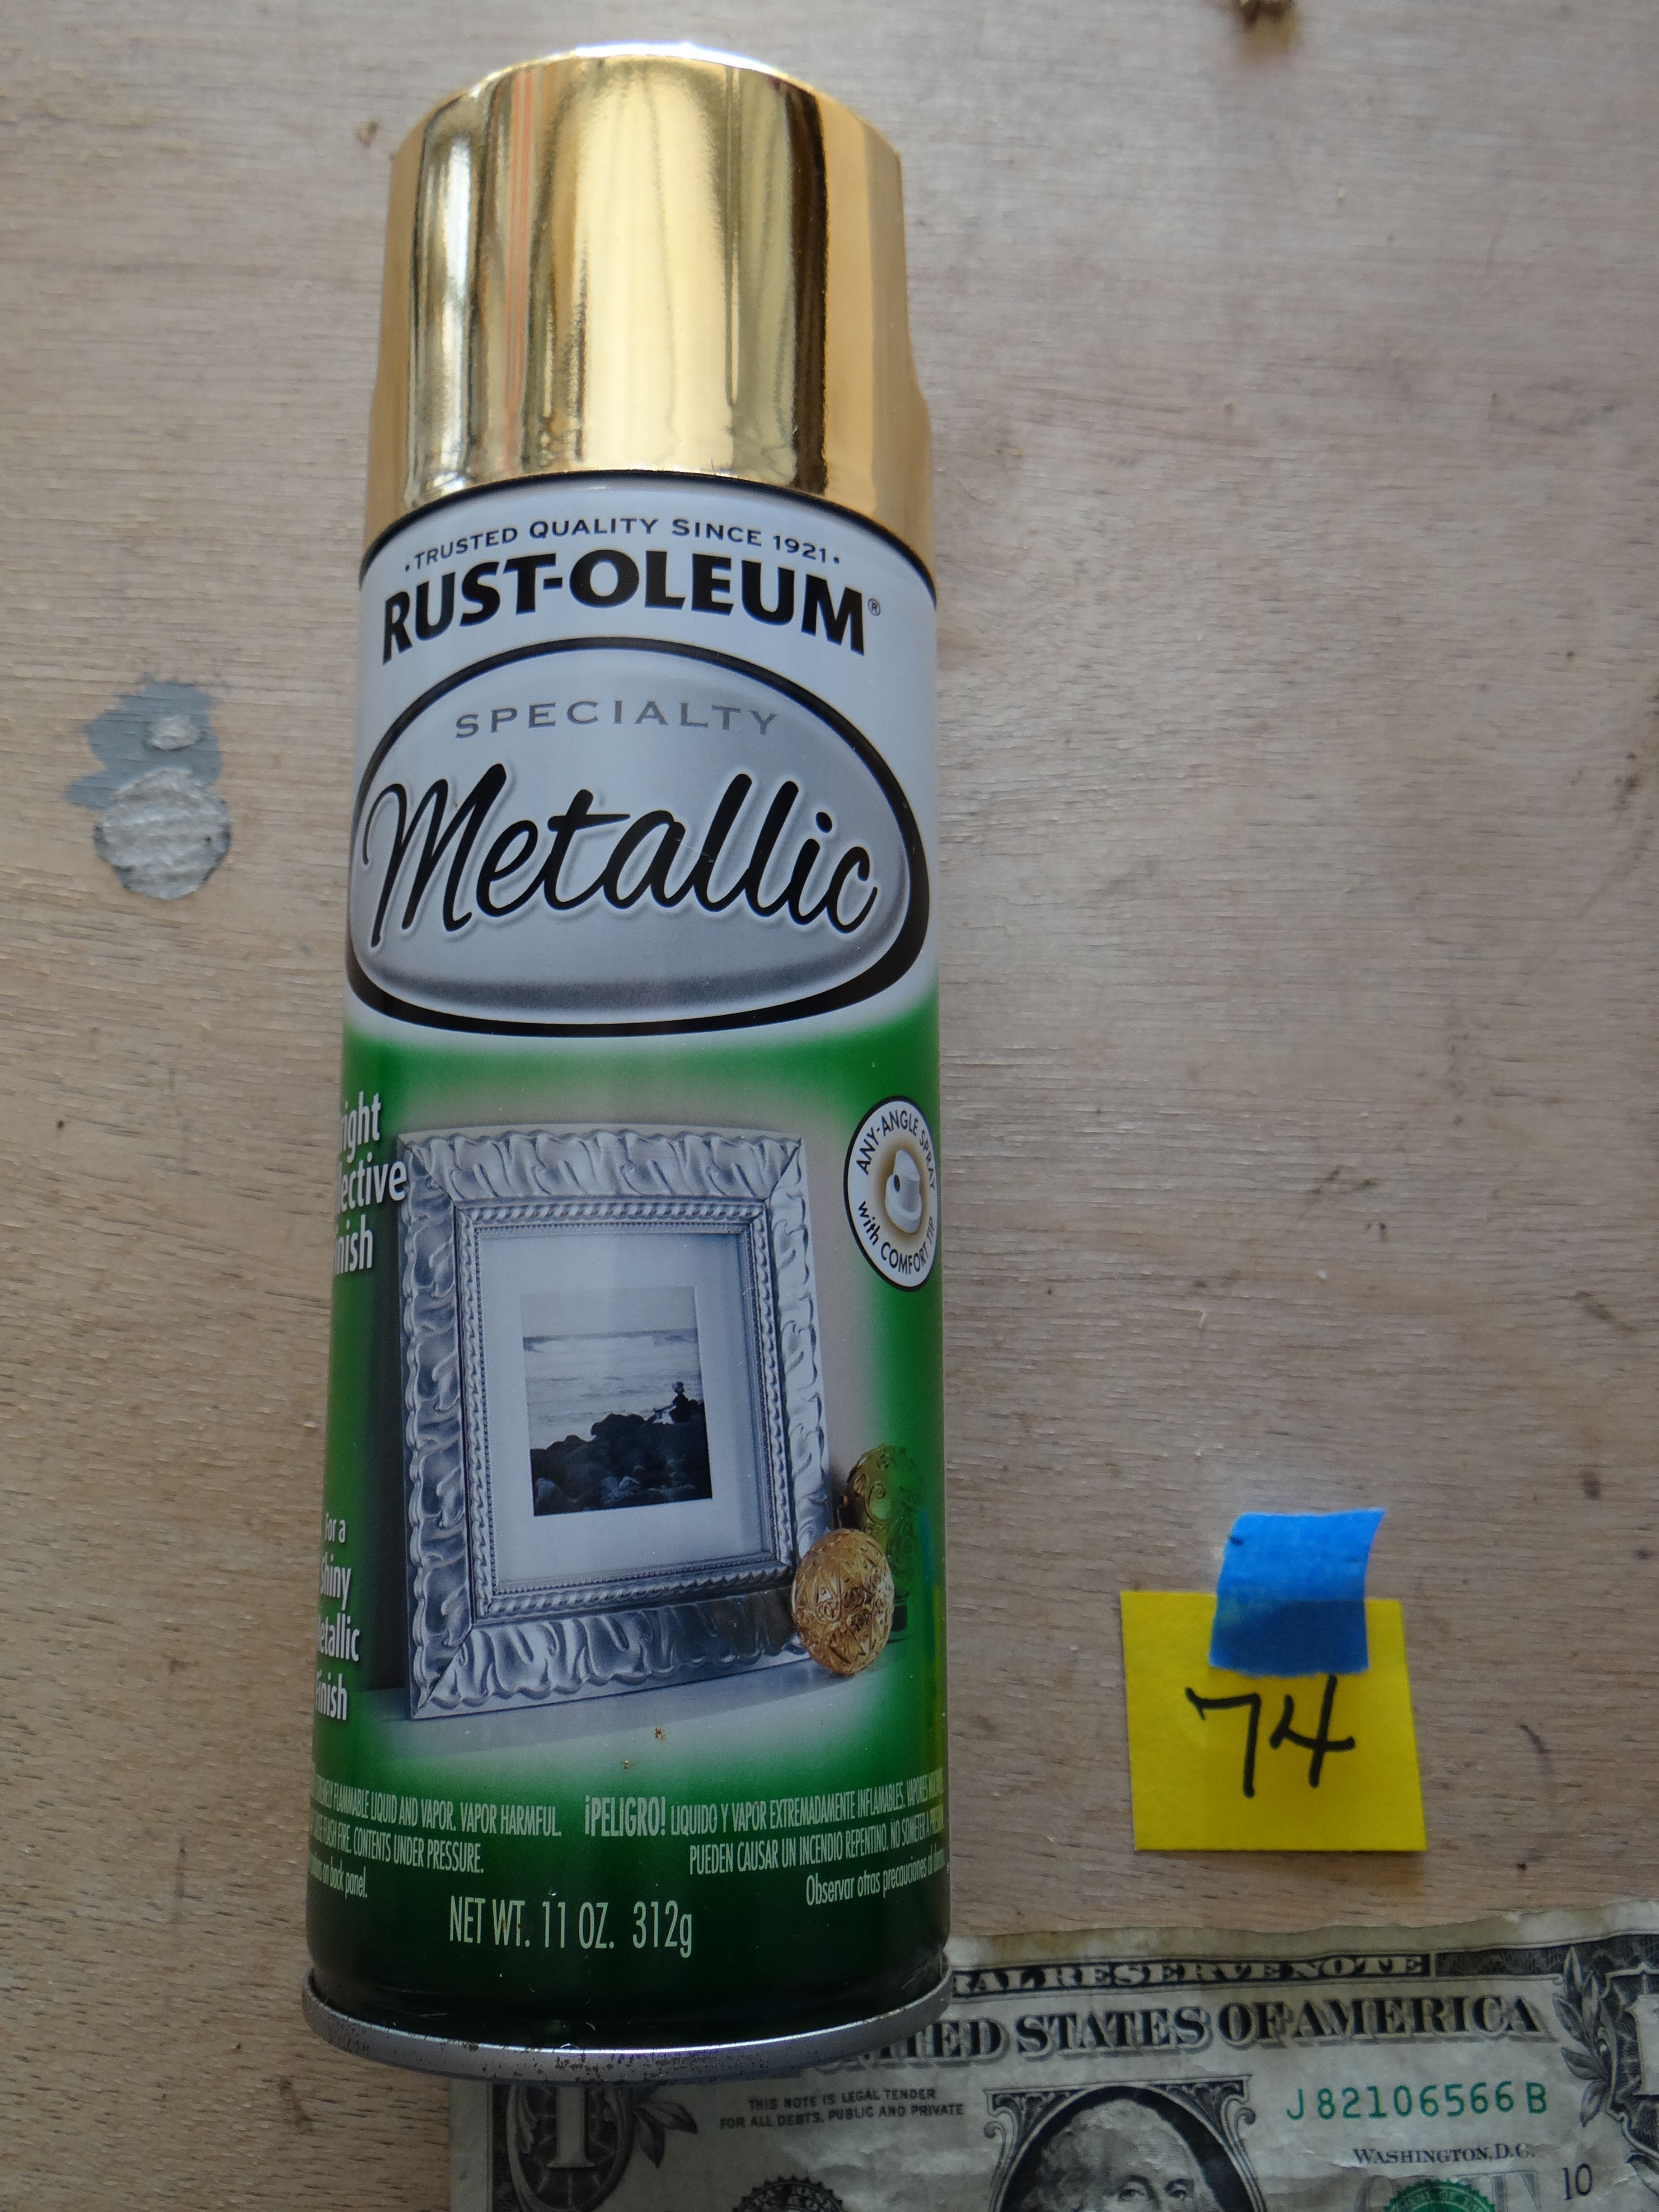 The Gold Spray Paint Test